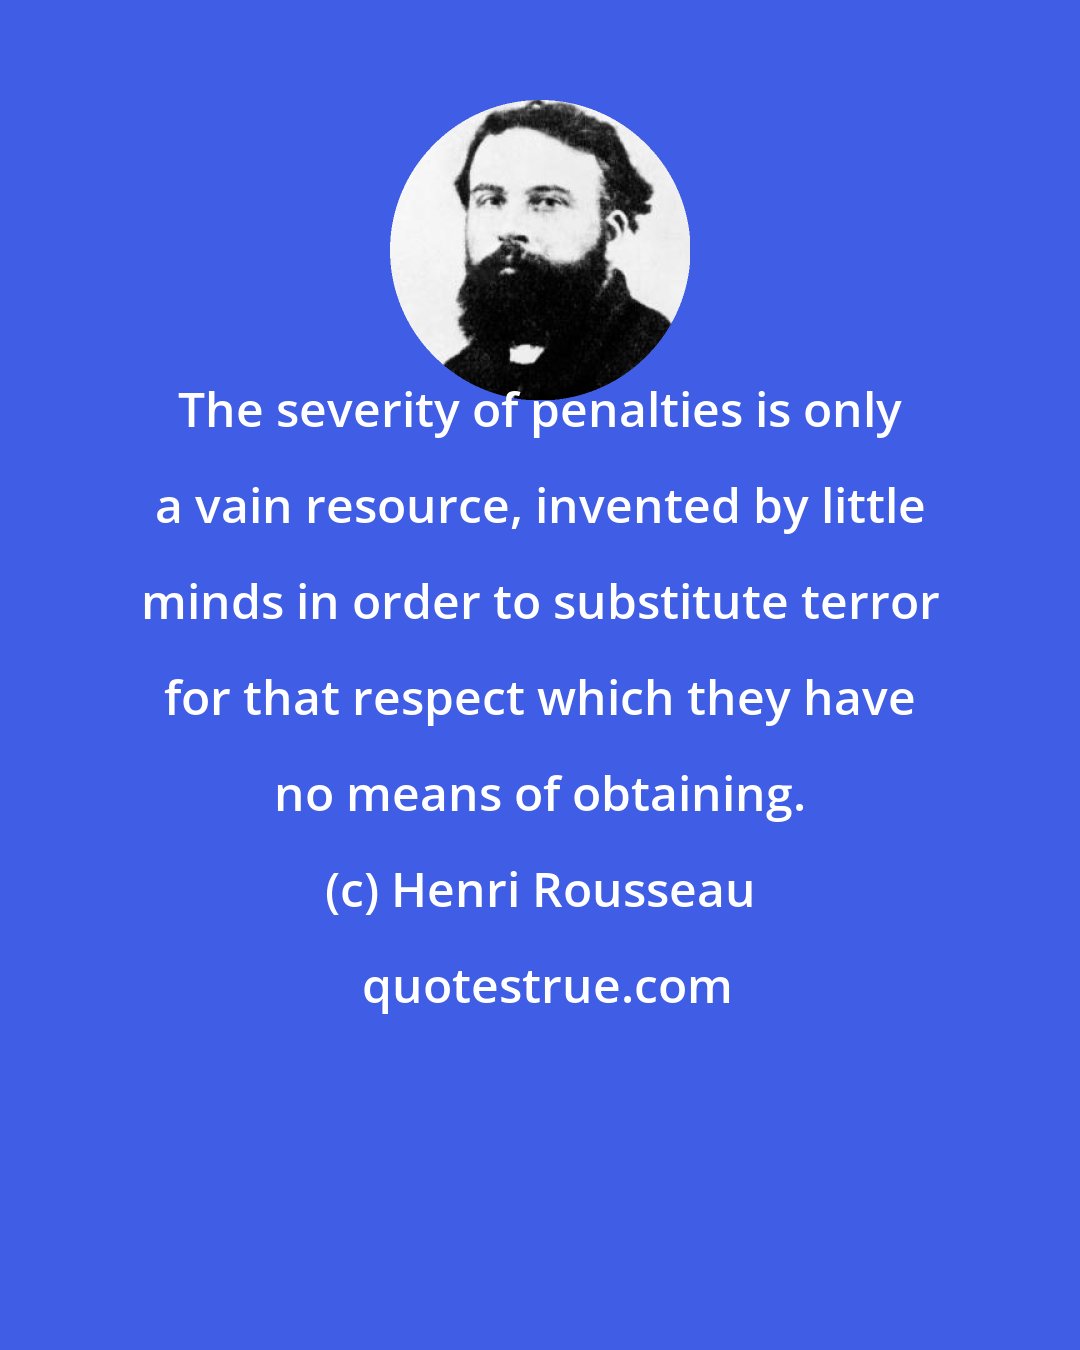 Henri Rousseau: The severity of penalties is only a vain resource, invented by little minds in order to substitute terror for that respect which they have no means of obtaining.